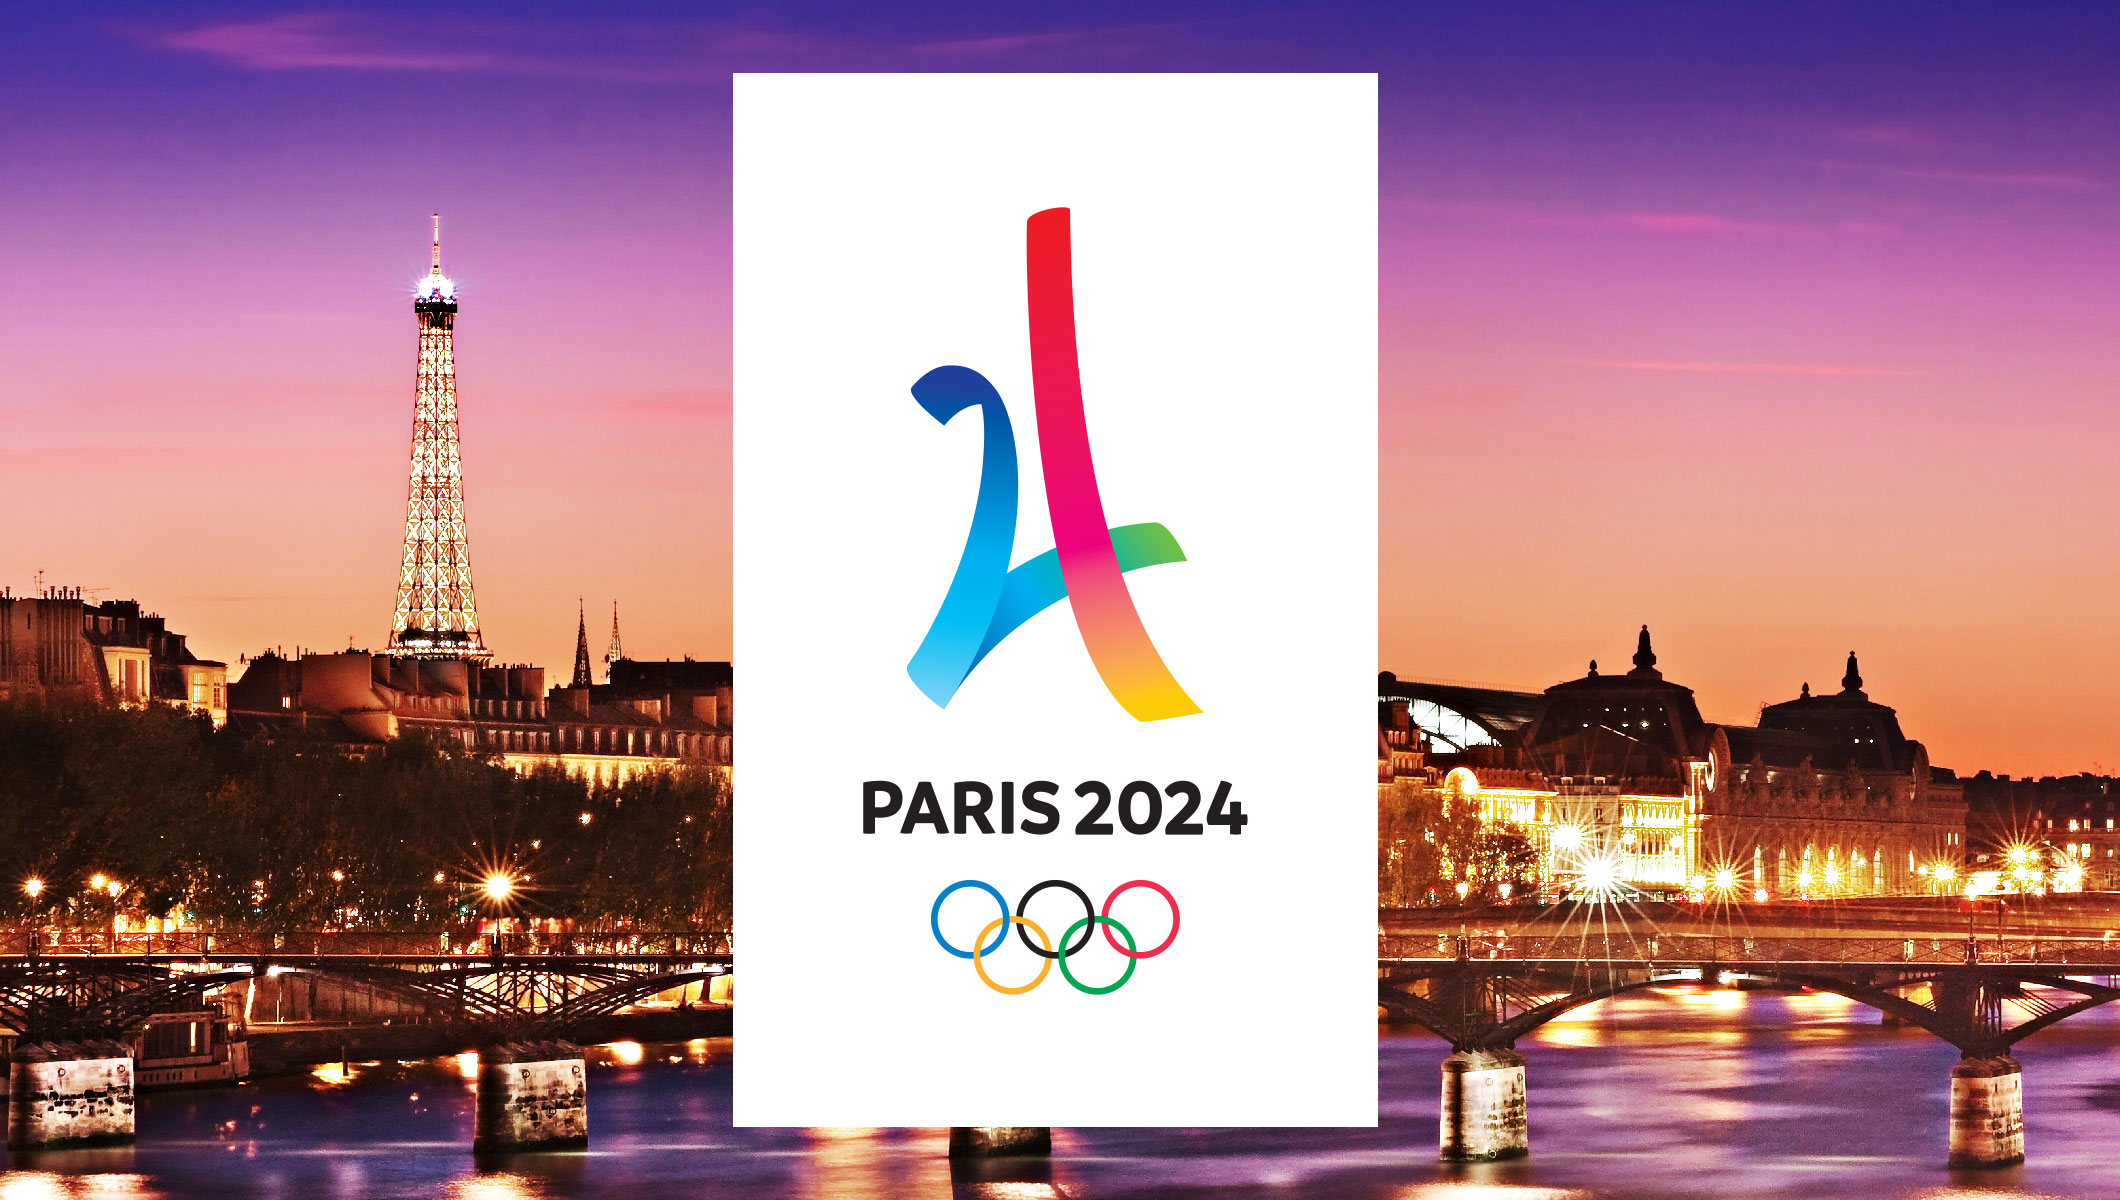 Paris 2024 puts forward its proposal for new sports Olympic News